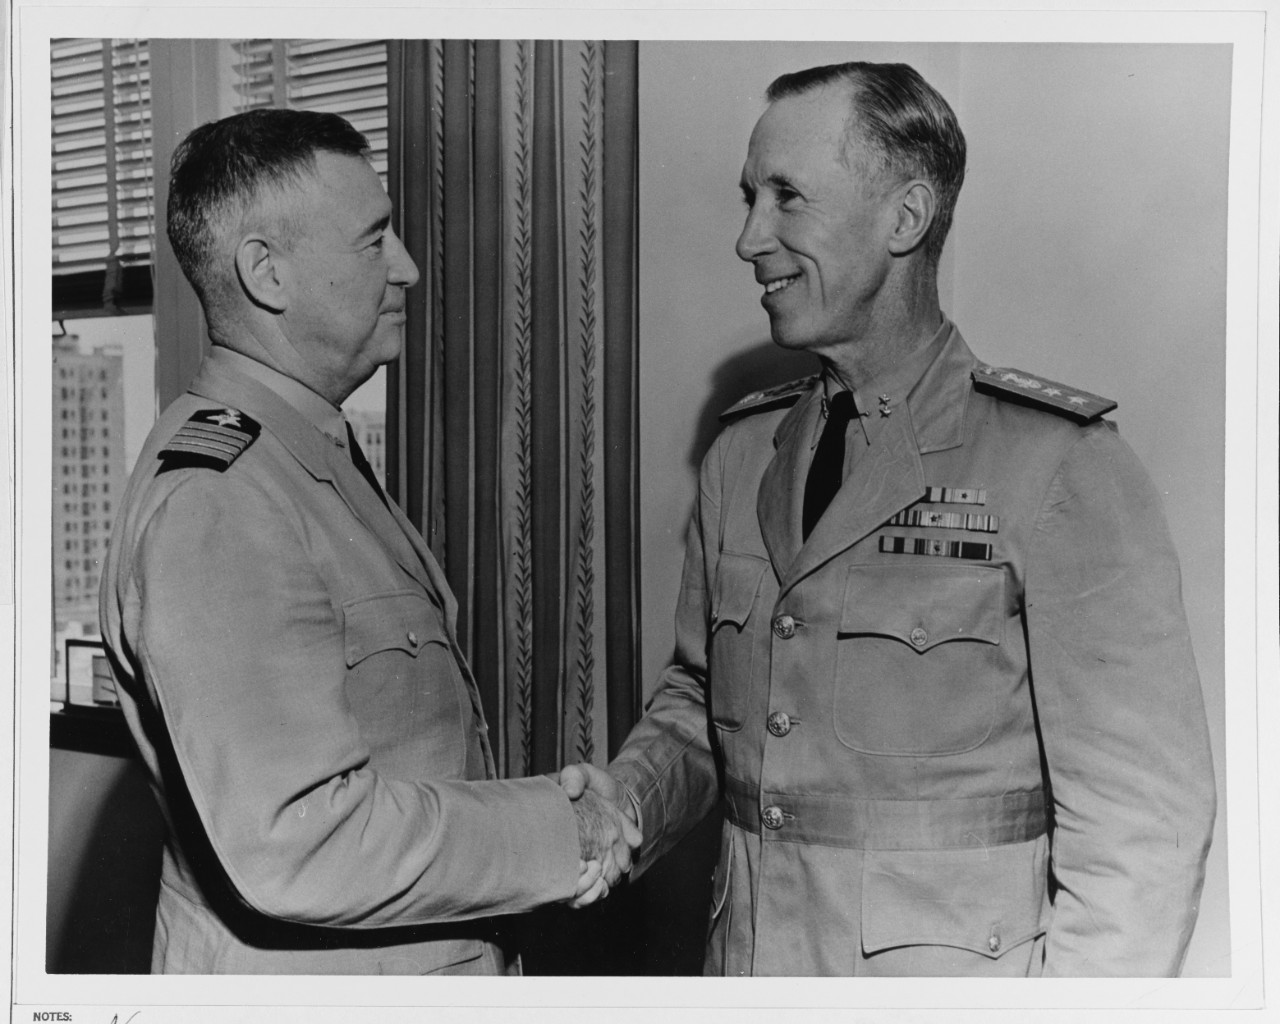 Rear Admiral Walter S. Anderson with Capt. H. H. J. Benson.